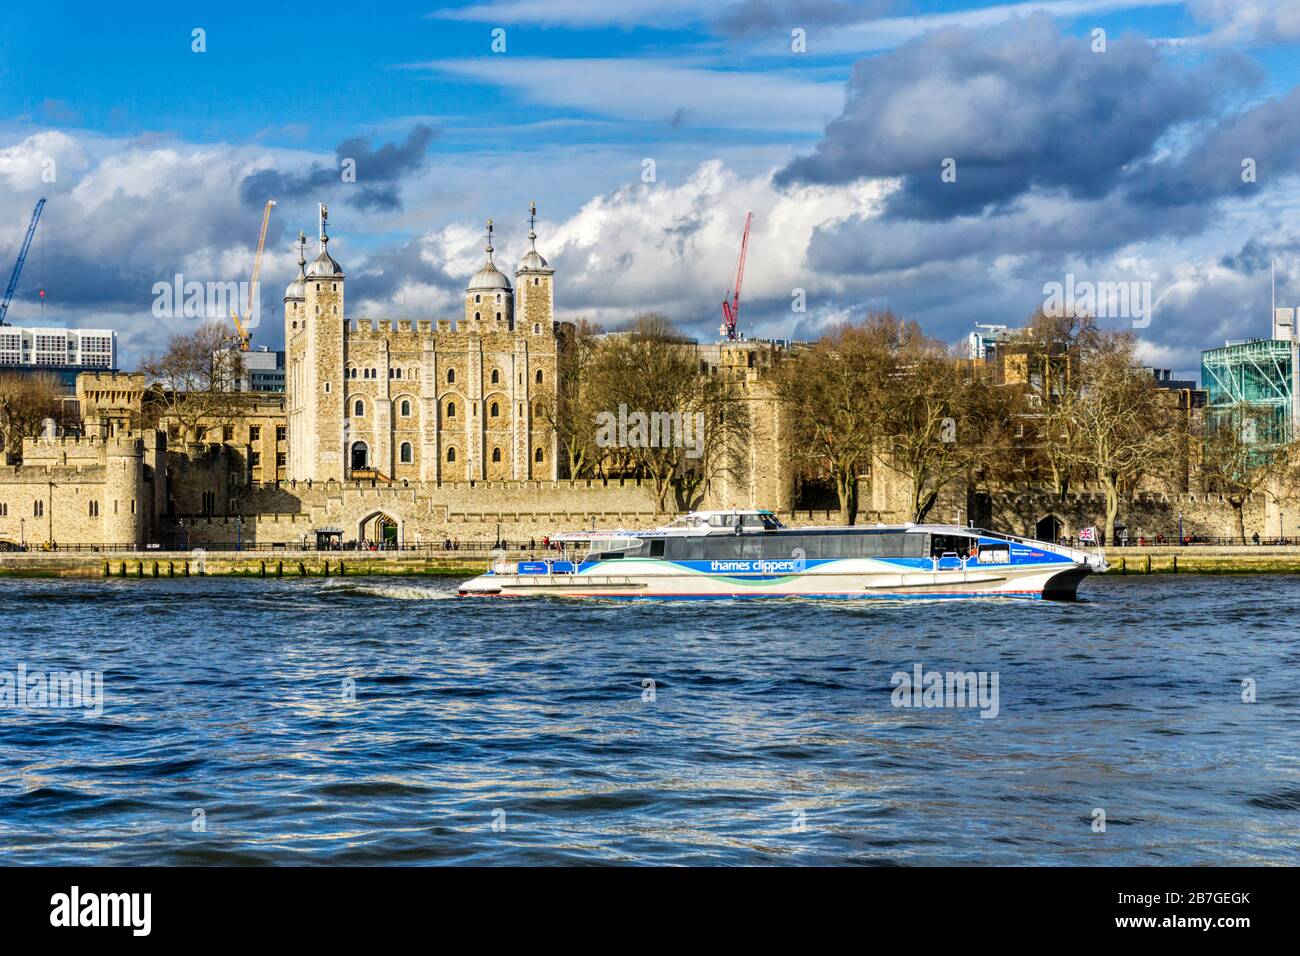 Thames Clipper Tornado on the River Thames passing the White Tower of the Tower of London. Stock Photo